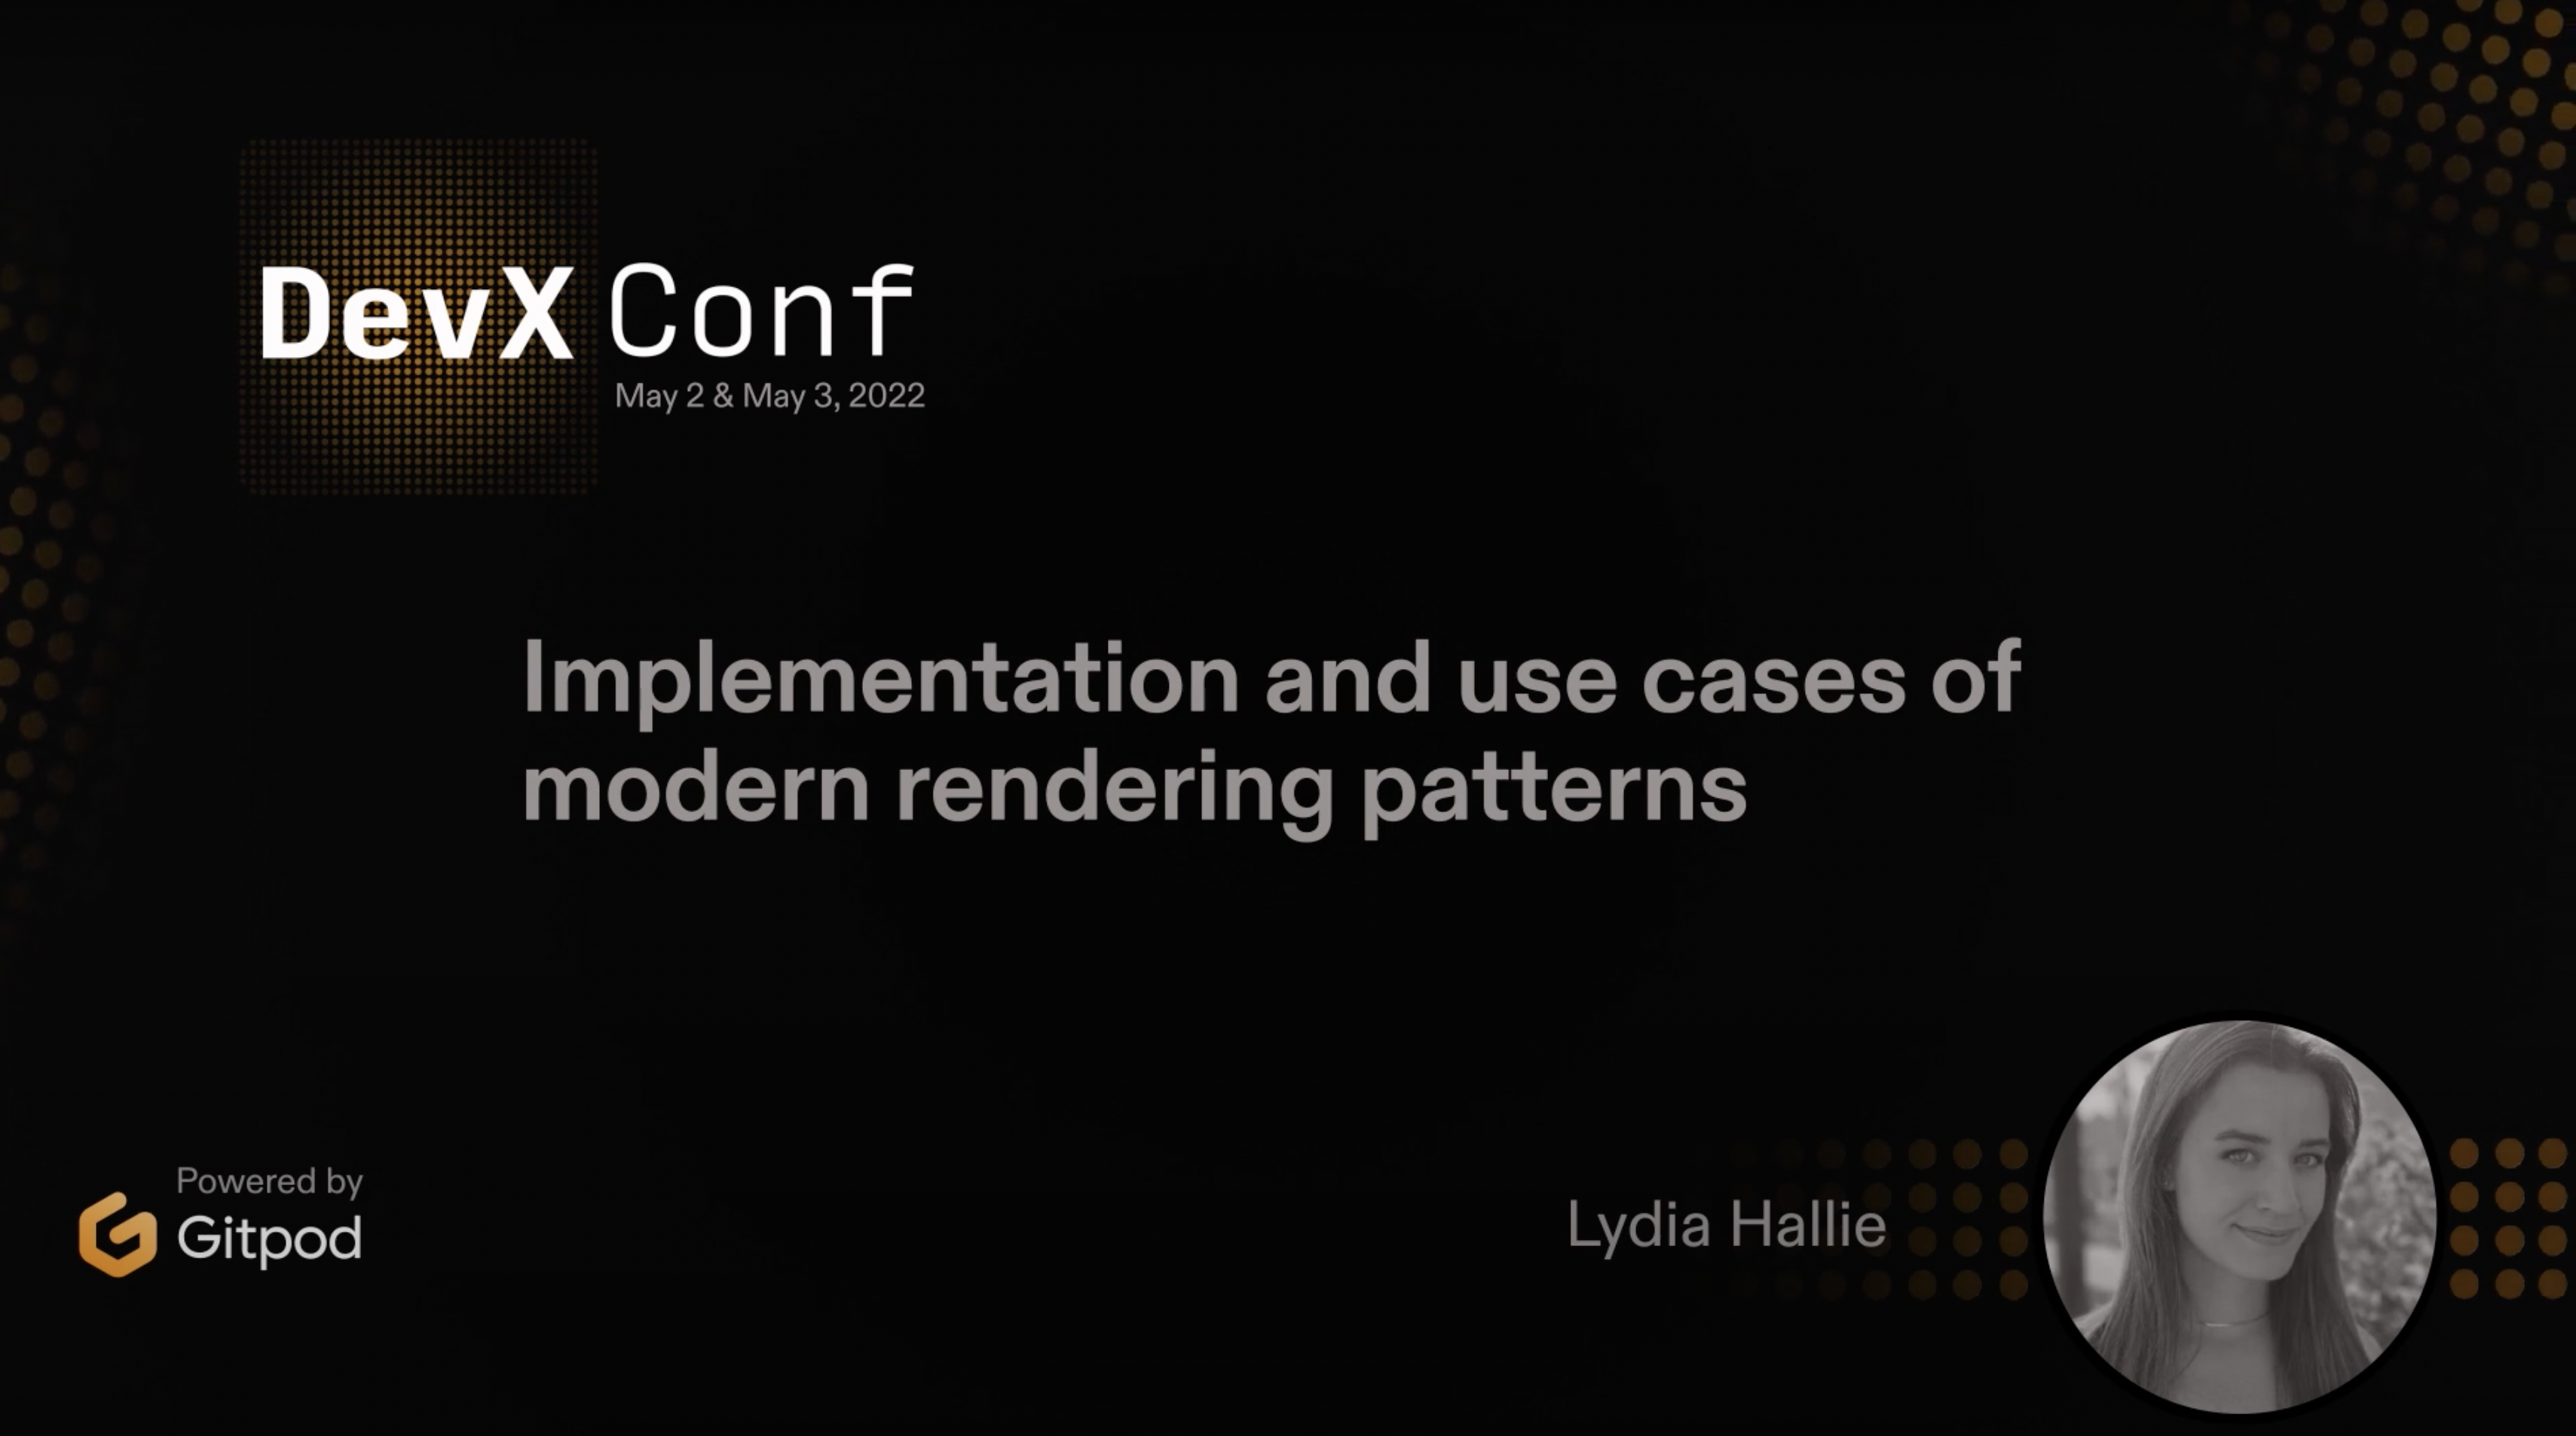 Implementation and use cases of modern rendering patterns by Lydia Hallie